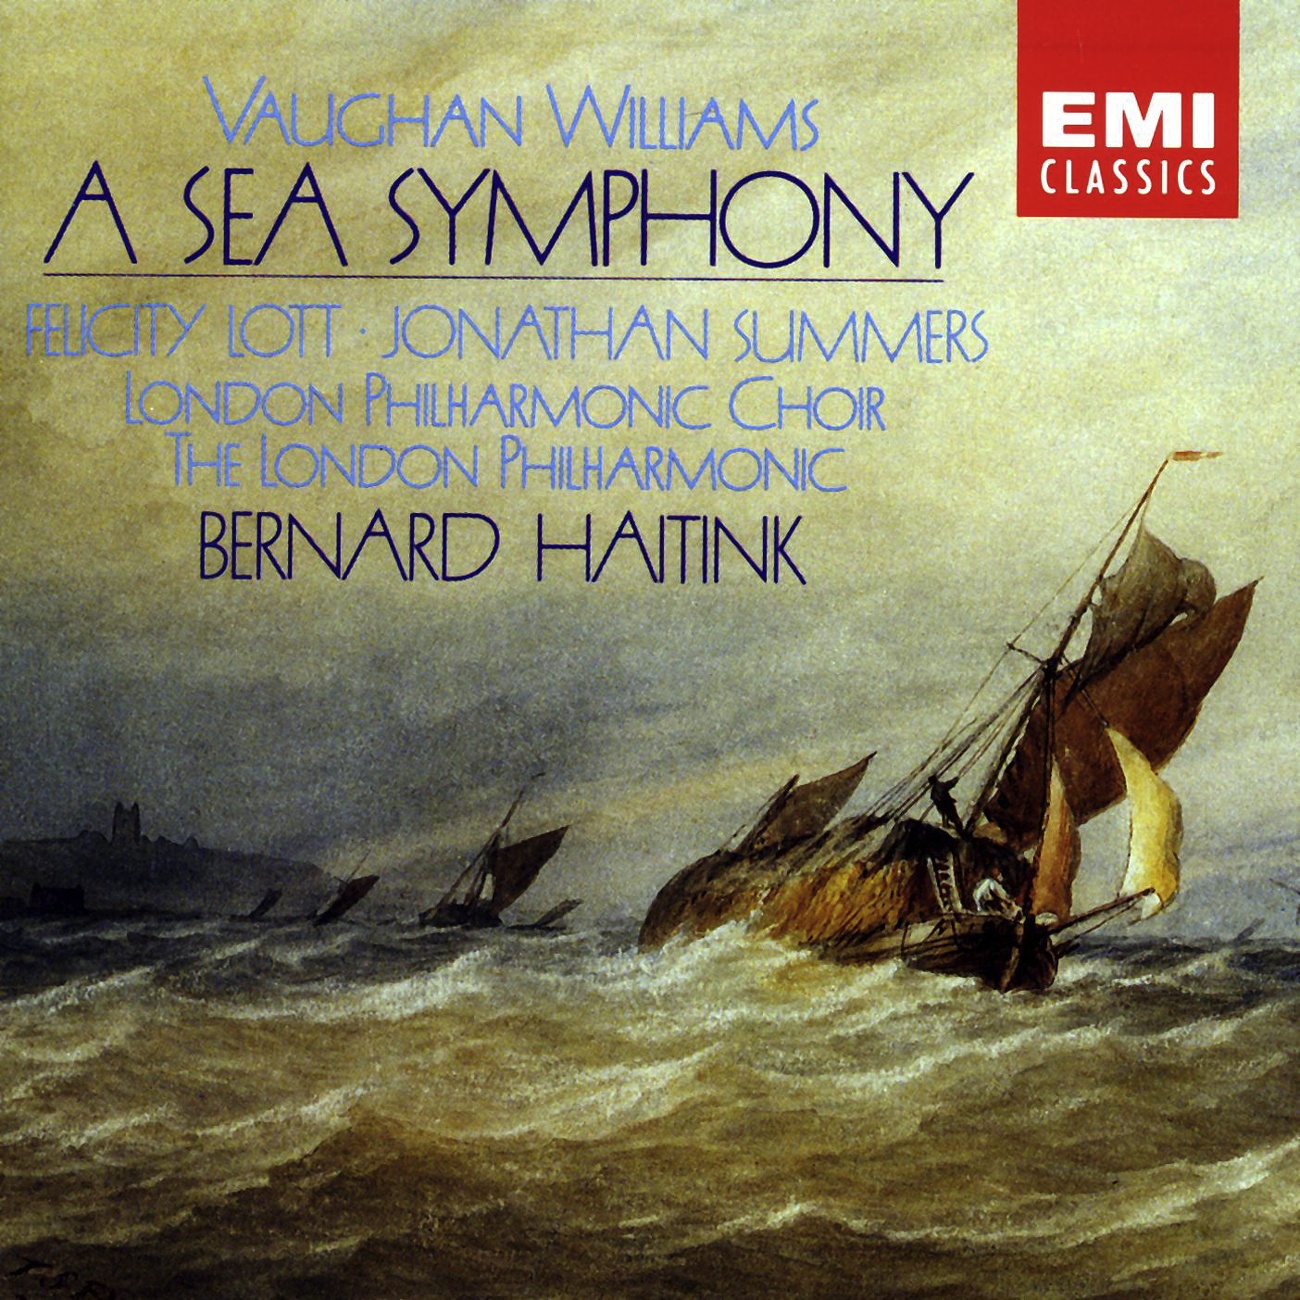 Vaughan Williams: A Sea Symphony: IV. The Explorers, Greater Than Stars Or Suns